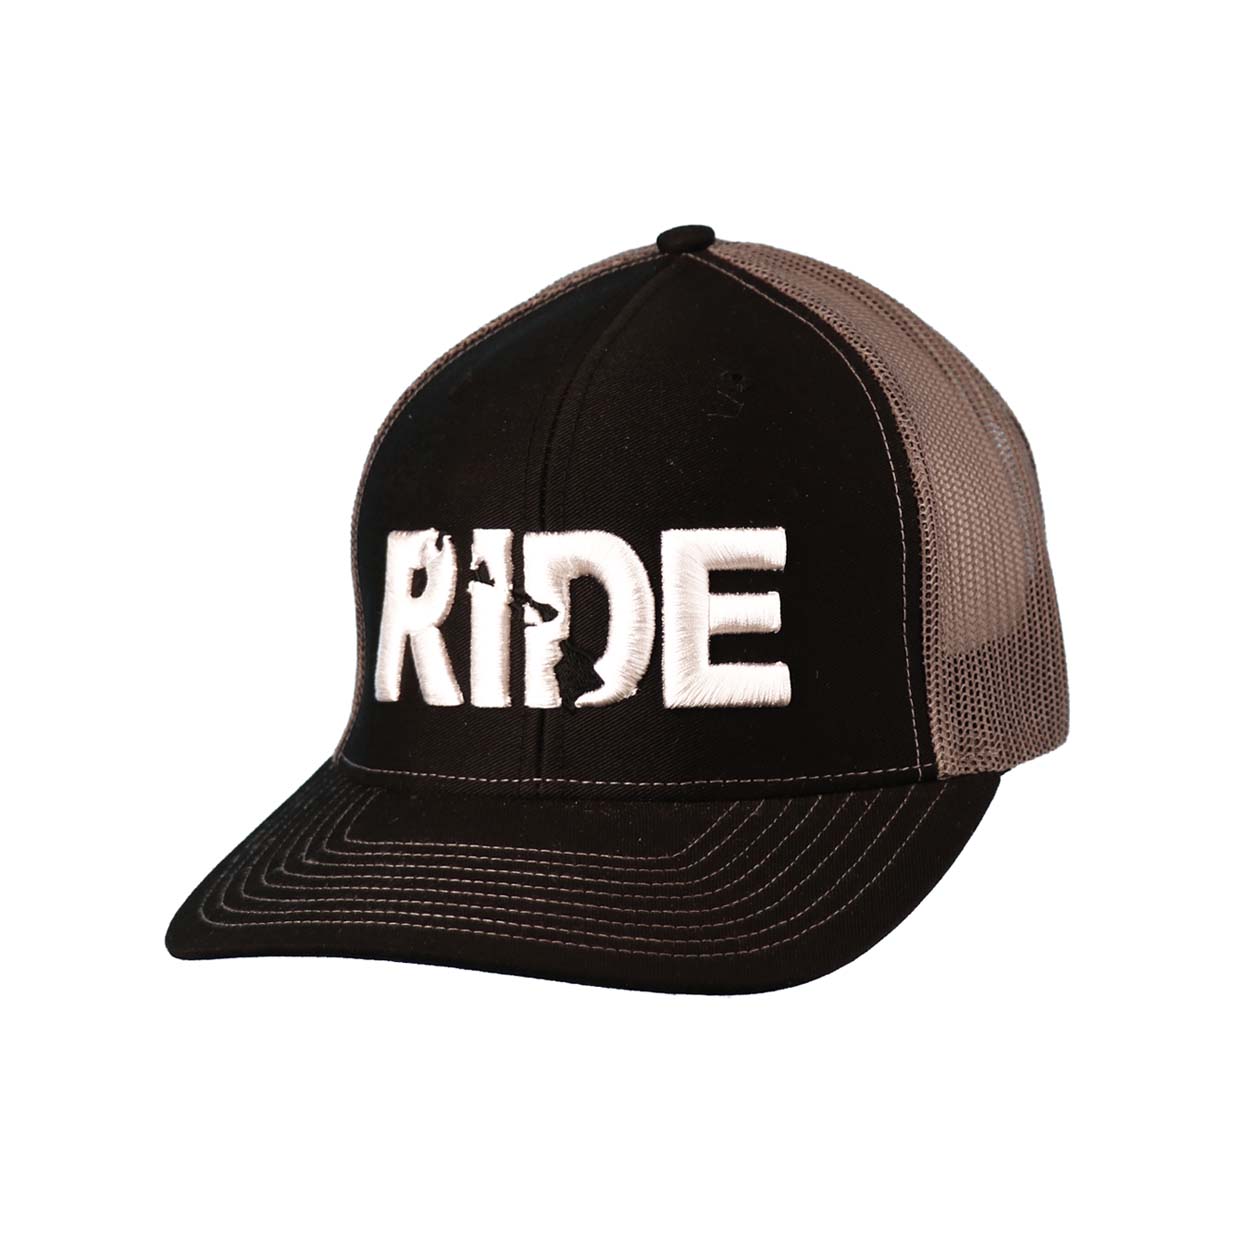 Ride Hawaii Classic Embroidered Snapback Trucker Hat Black/Charcoal